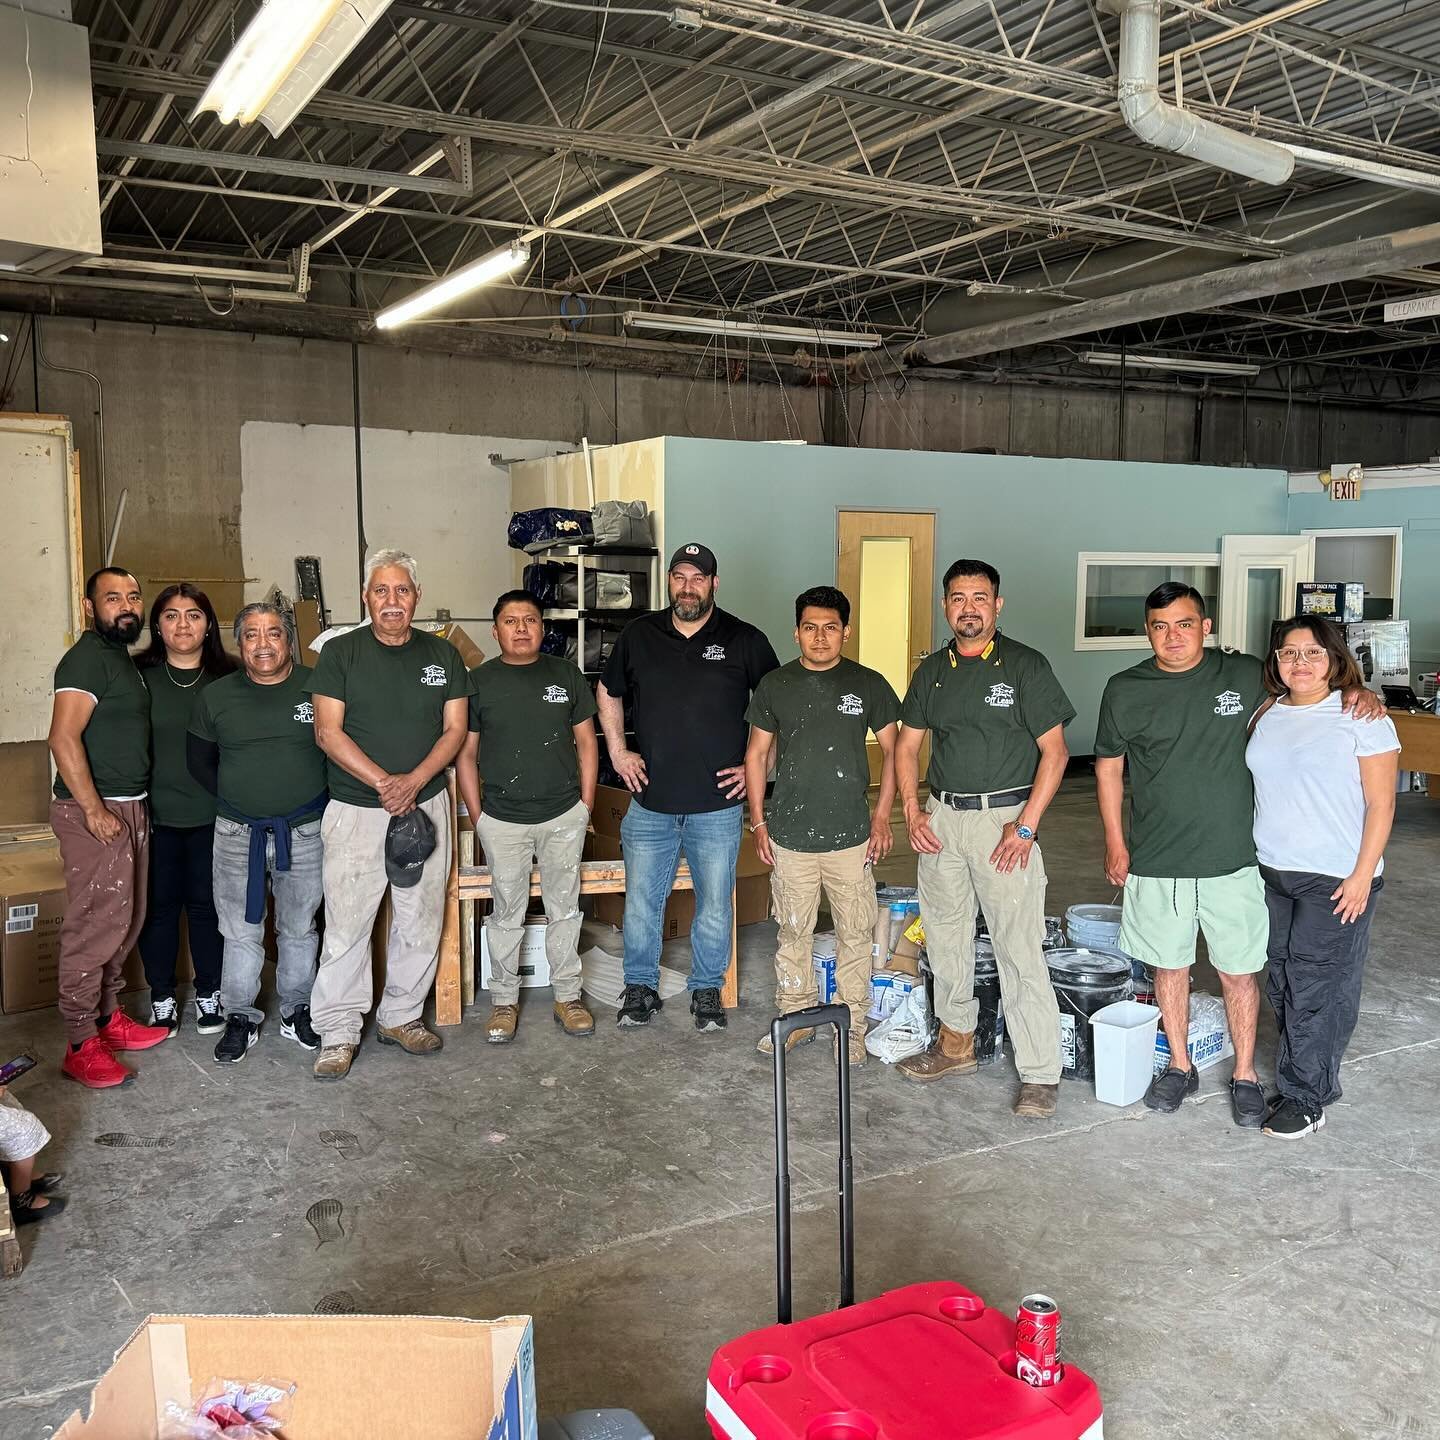 Shoutout to our incredible team! 🙌👷&zwj;♂️👷&zwj;♀️

Building dreams, one project at a time. Grateful for our exceptional team whose dedication, skill, and teamwork make it all possible. Here&rsquo;s to each member&rsquo;s unwavering commitment and